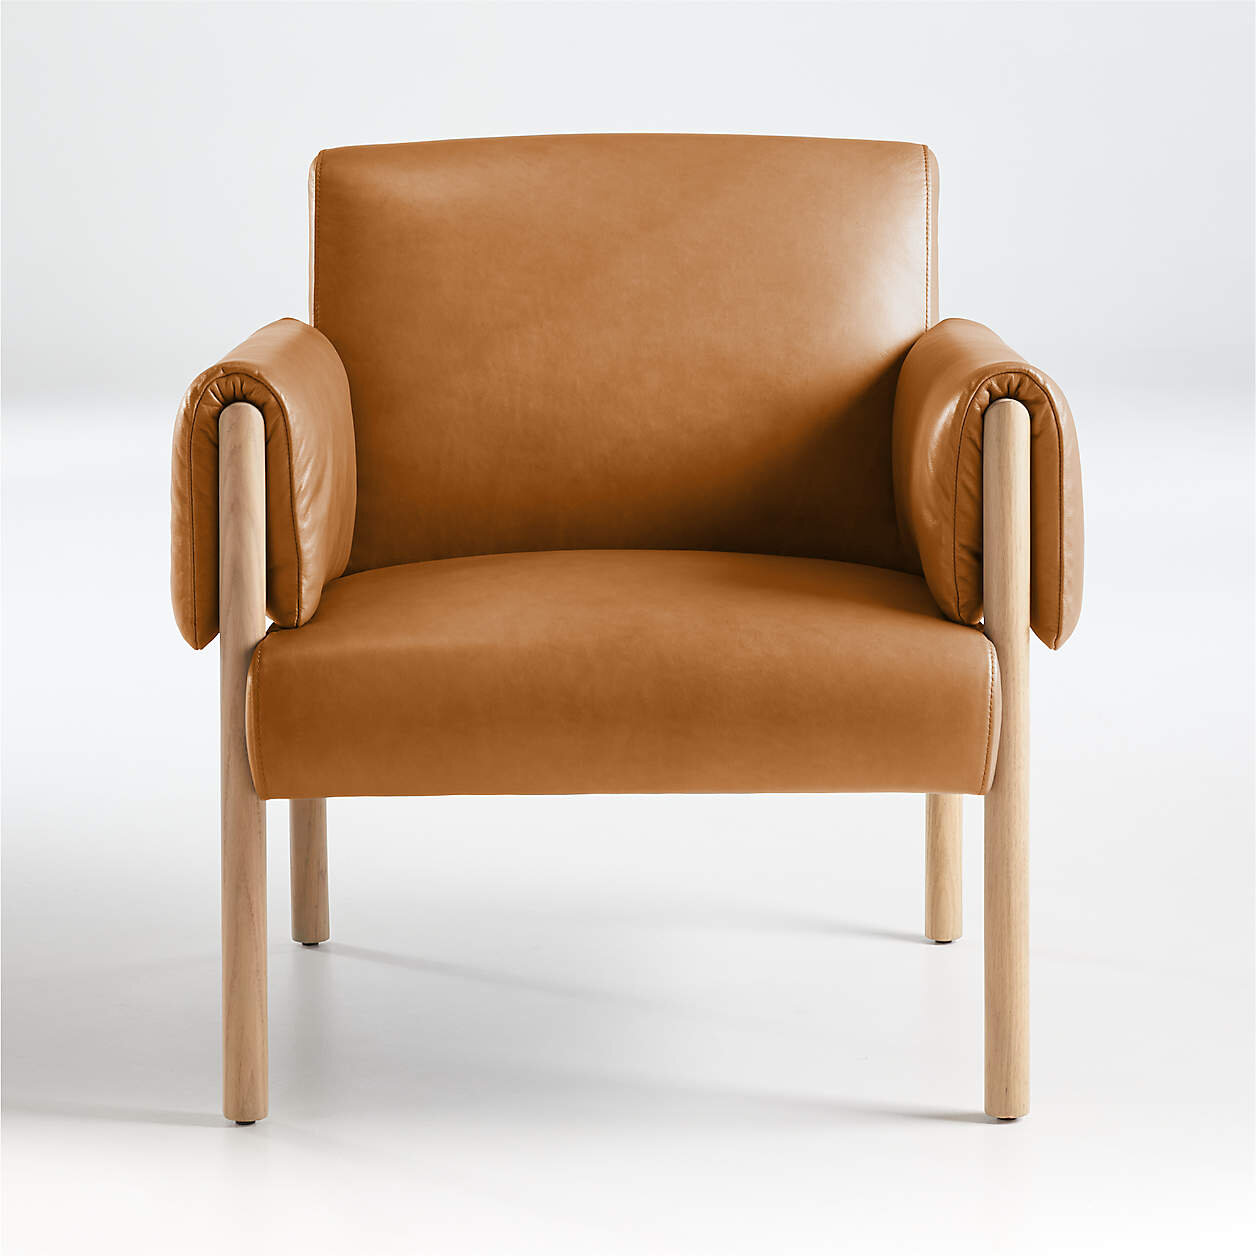 7. Diderot Chair